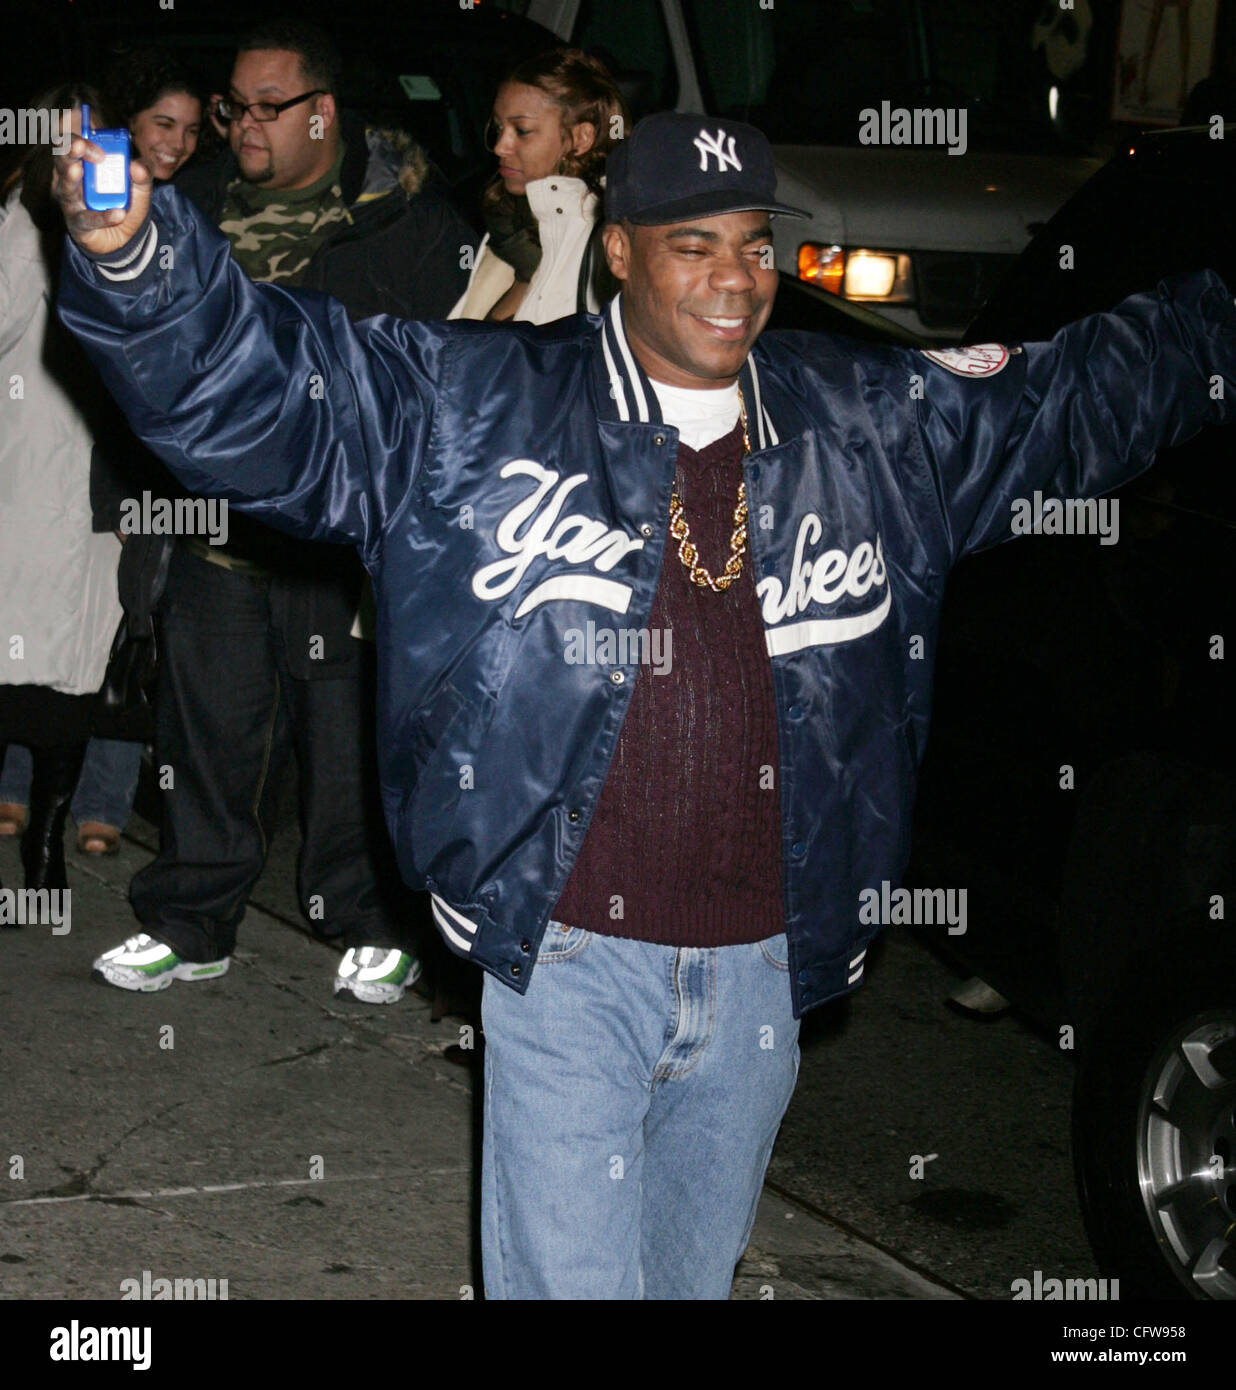 Feb 12, 2007; New York, NY, USA; Actor TRACY MORGAN poses for photos at his appearance on 'The Late Show With David Letterman' held at the Ed Sullivan Theater. Mandatory Credit: Photo by Nancy Kaszerman/ZUMA Press. (©) Copyright 2006 by Nancy Kaszerman Stock Photo